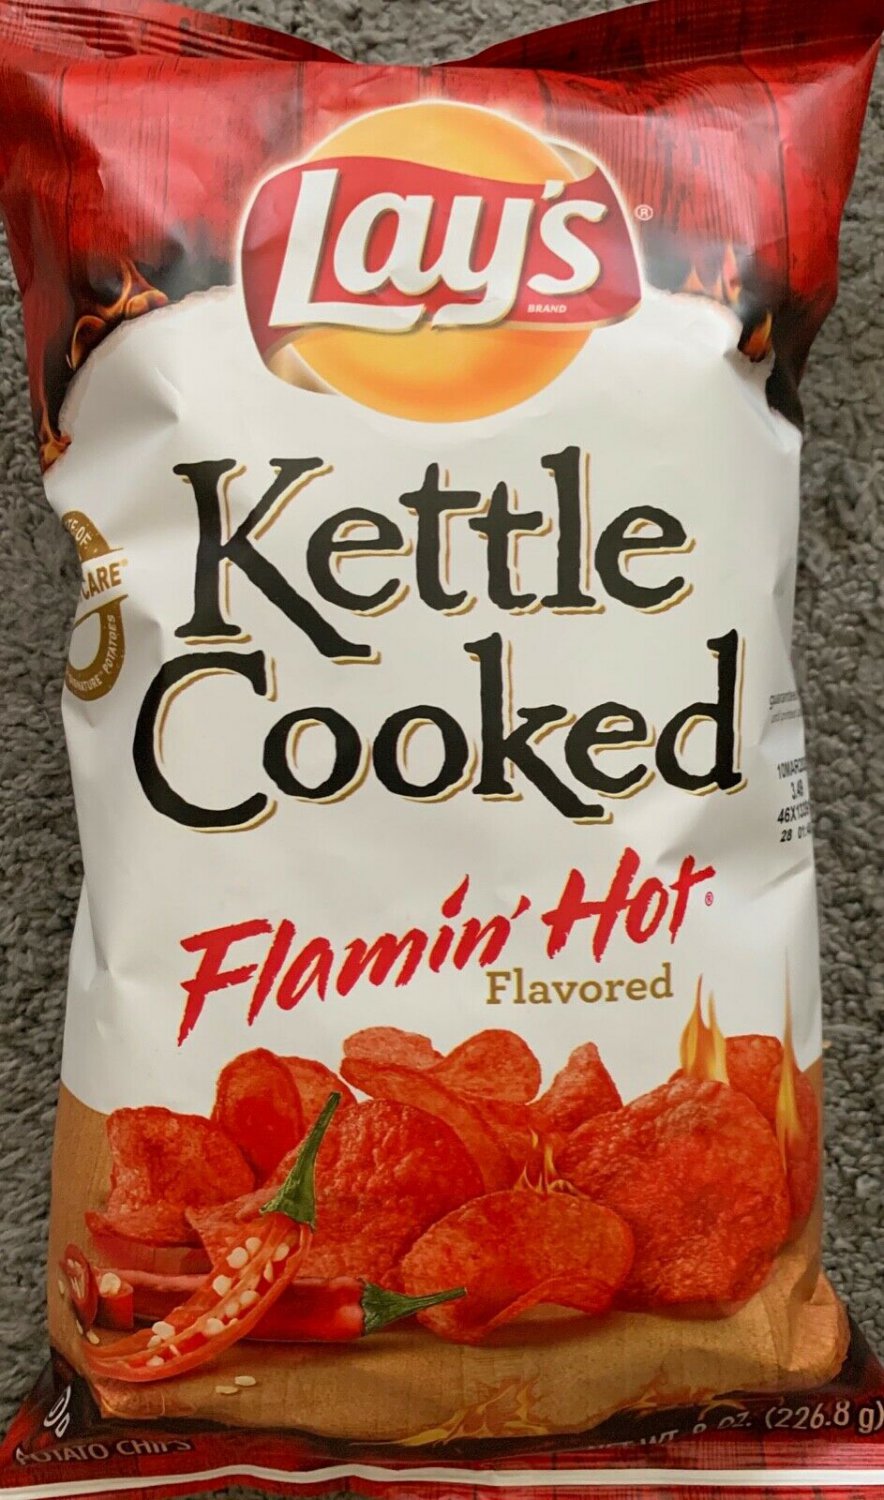 Lays Kettle Cooked Flamin Hot Flavored Potato Chips 8 Oz 226 8g Bag